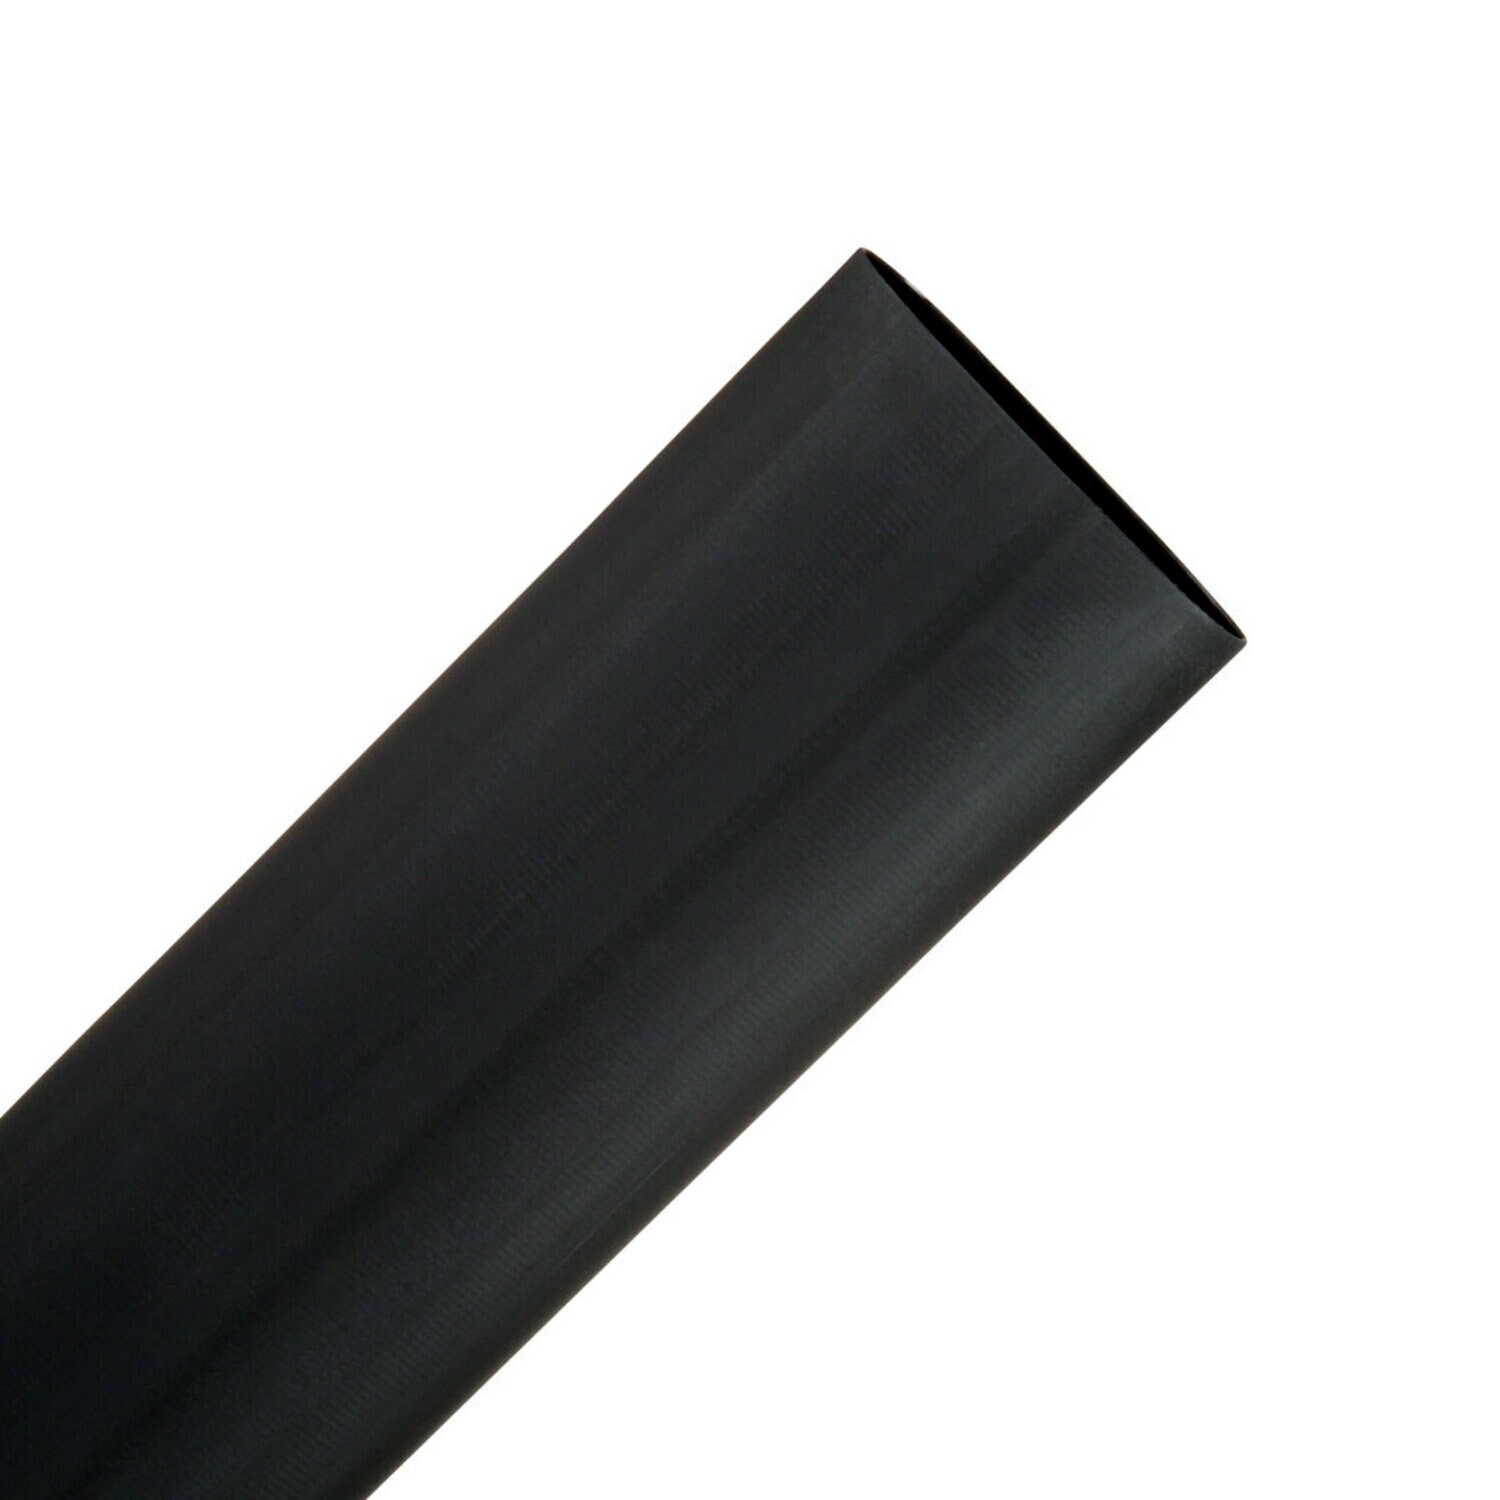 7100054618 - 3M Thin-Wall Heat Shrink Tubing EPS-300, Adhesive-Lined, 1
1/2-48"-Black-24 Pcs, 48 in length sticks, 24 pieces/case